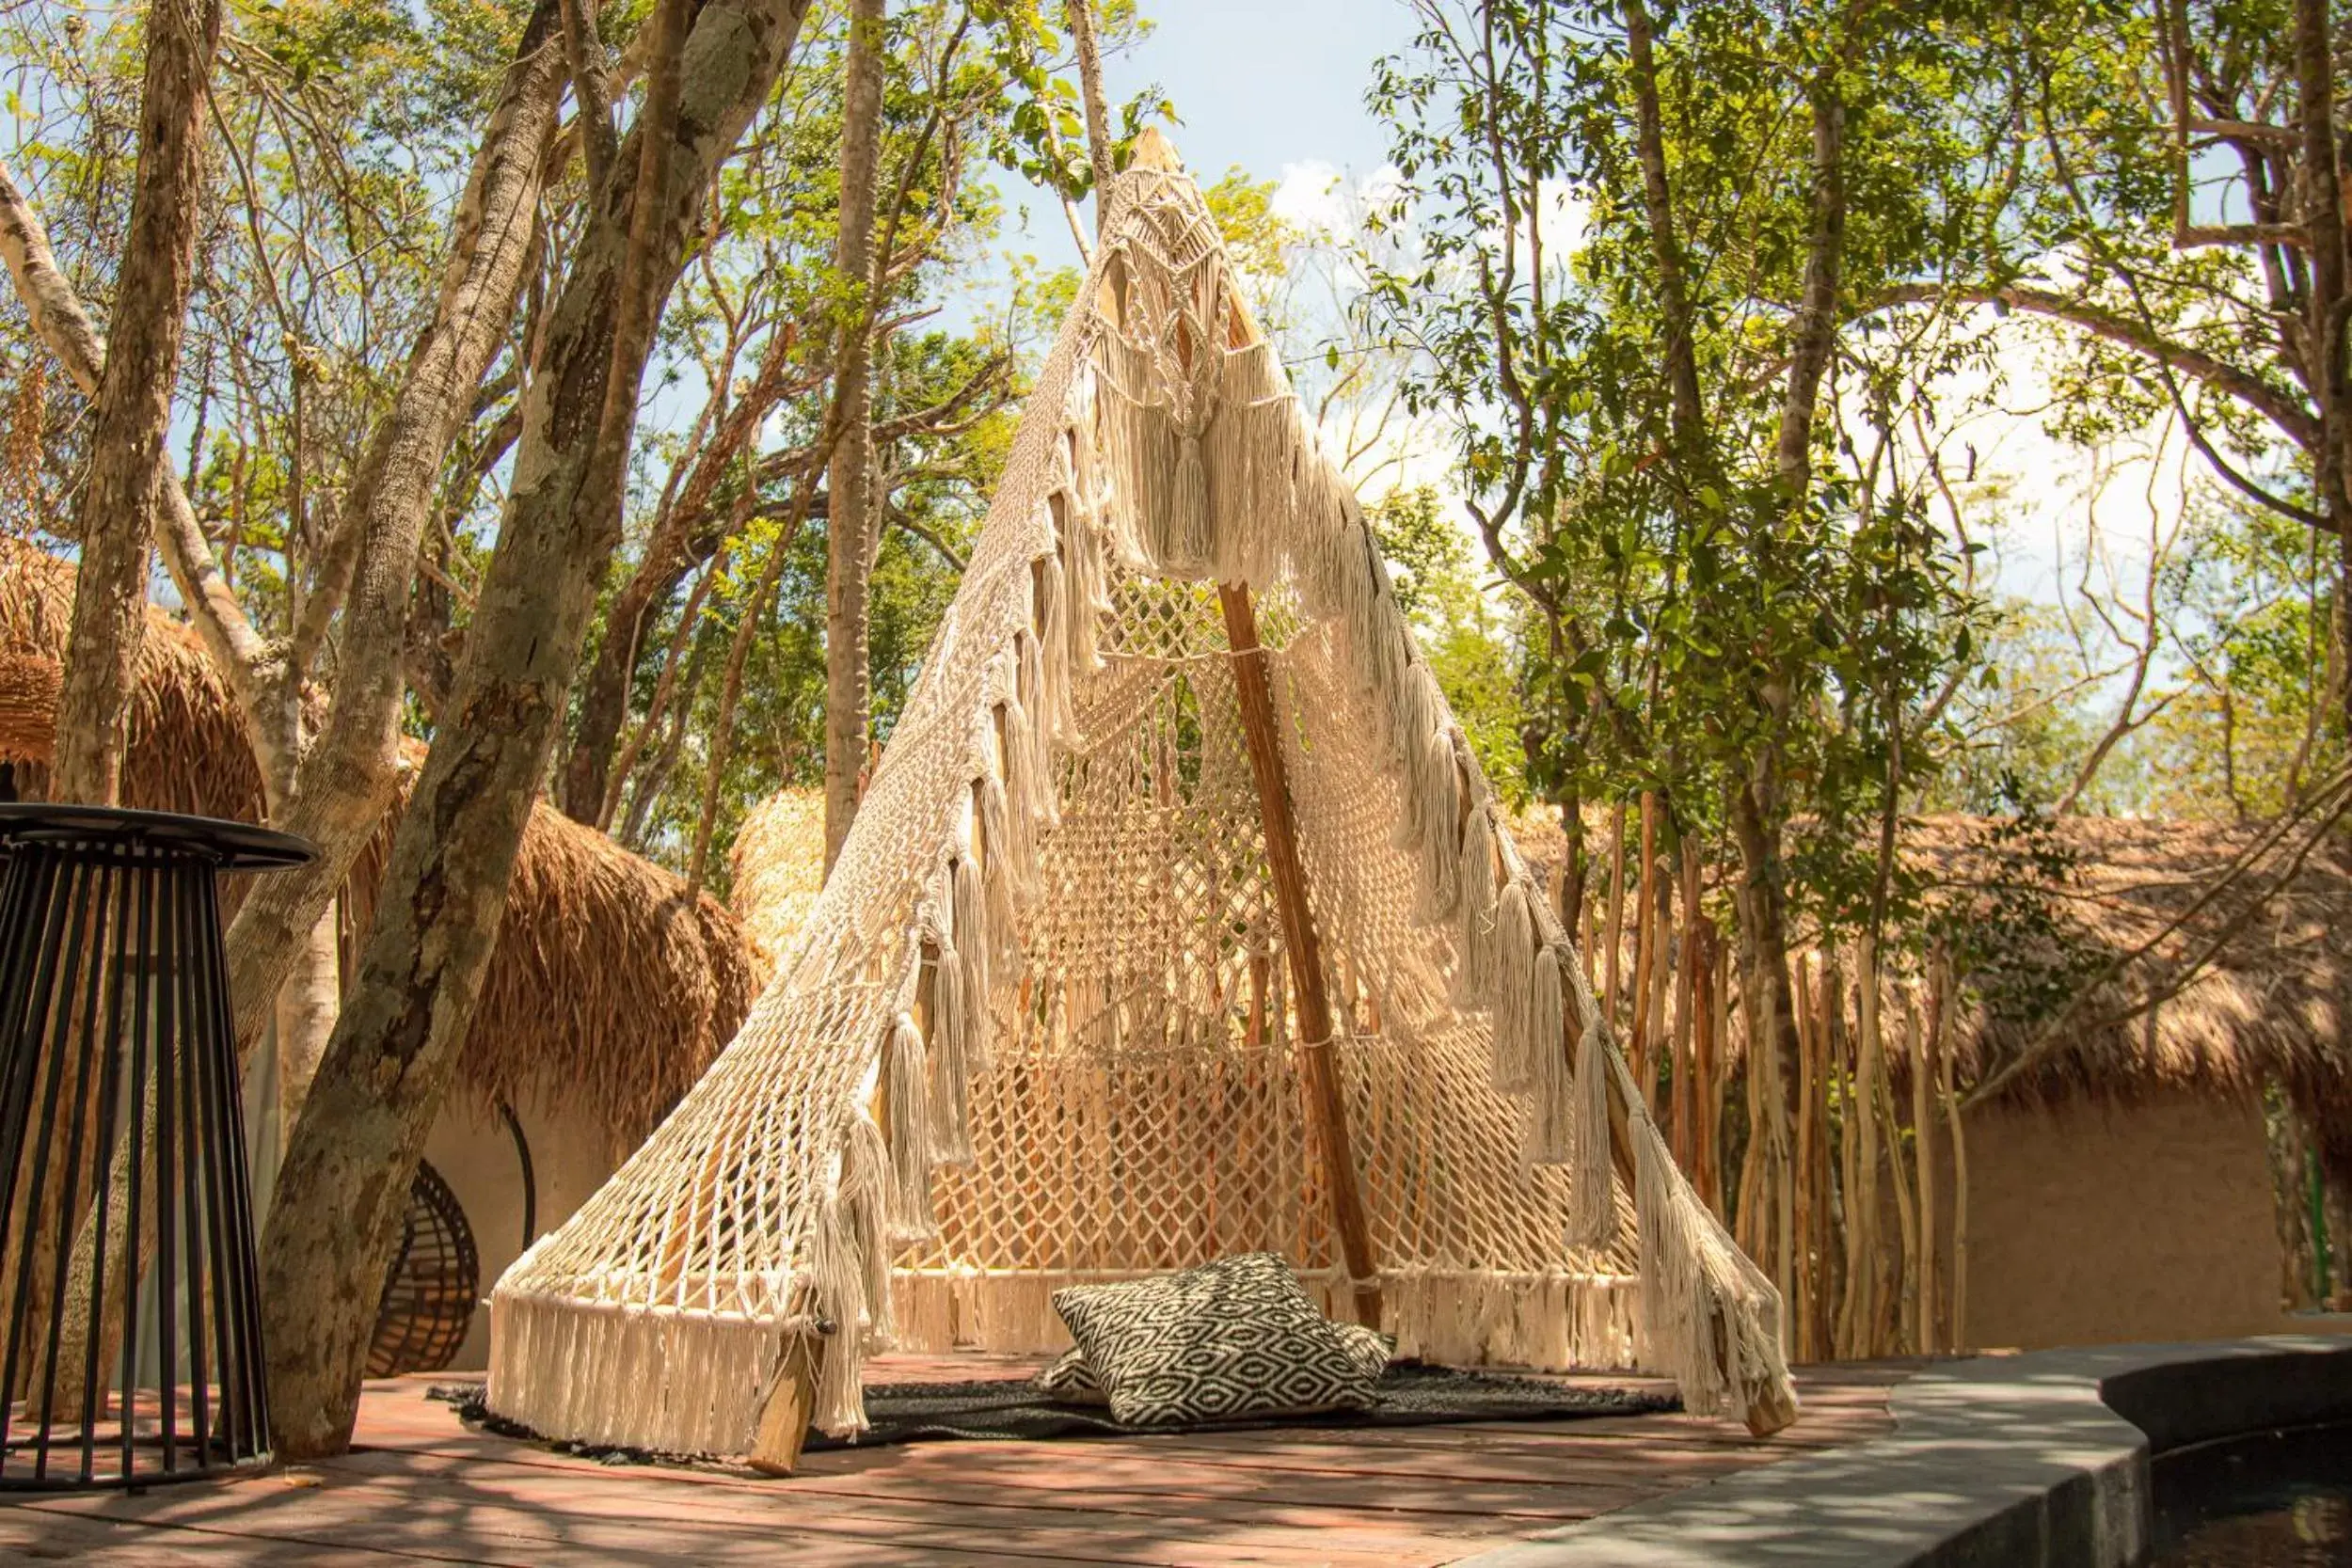 Area and facilities in The Yellow Nest Tulum